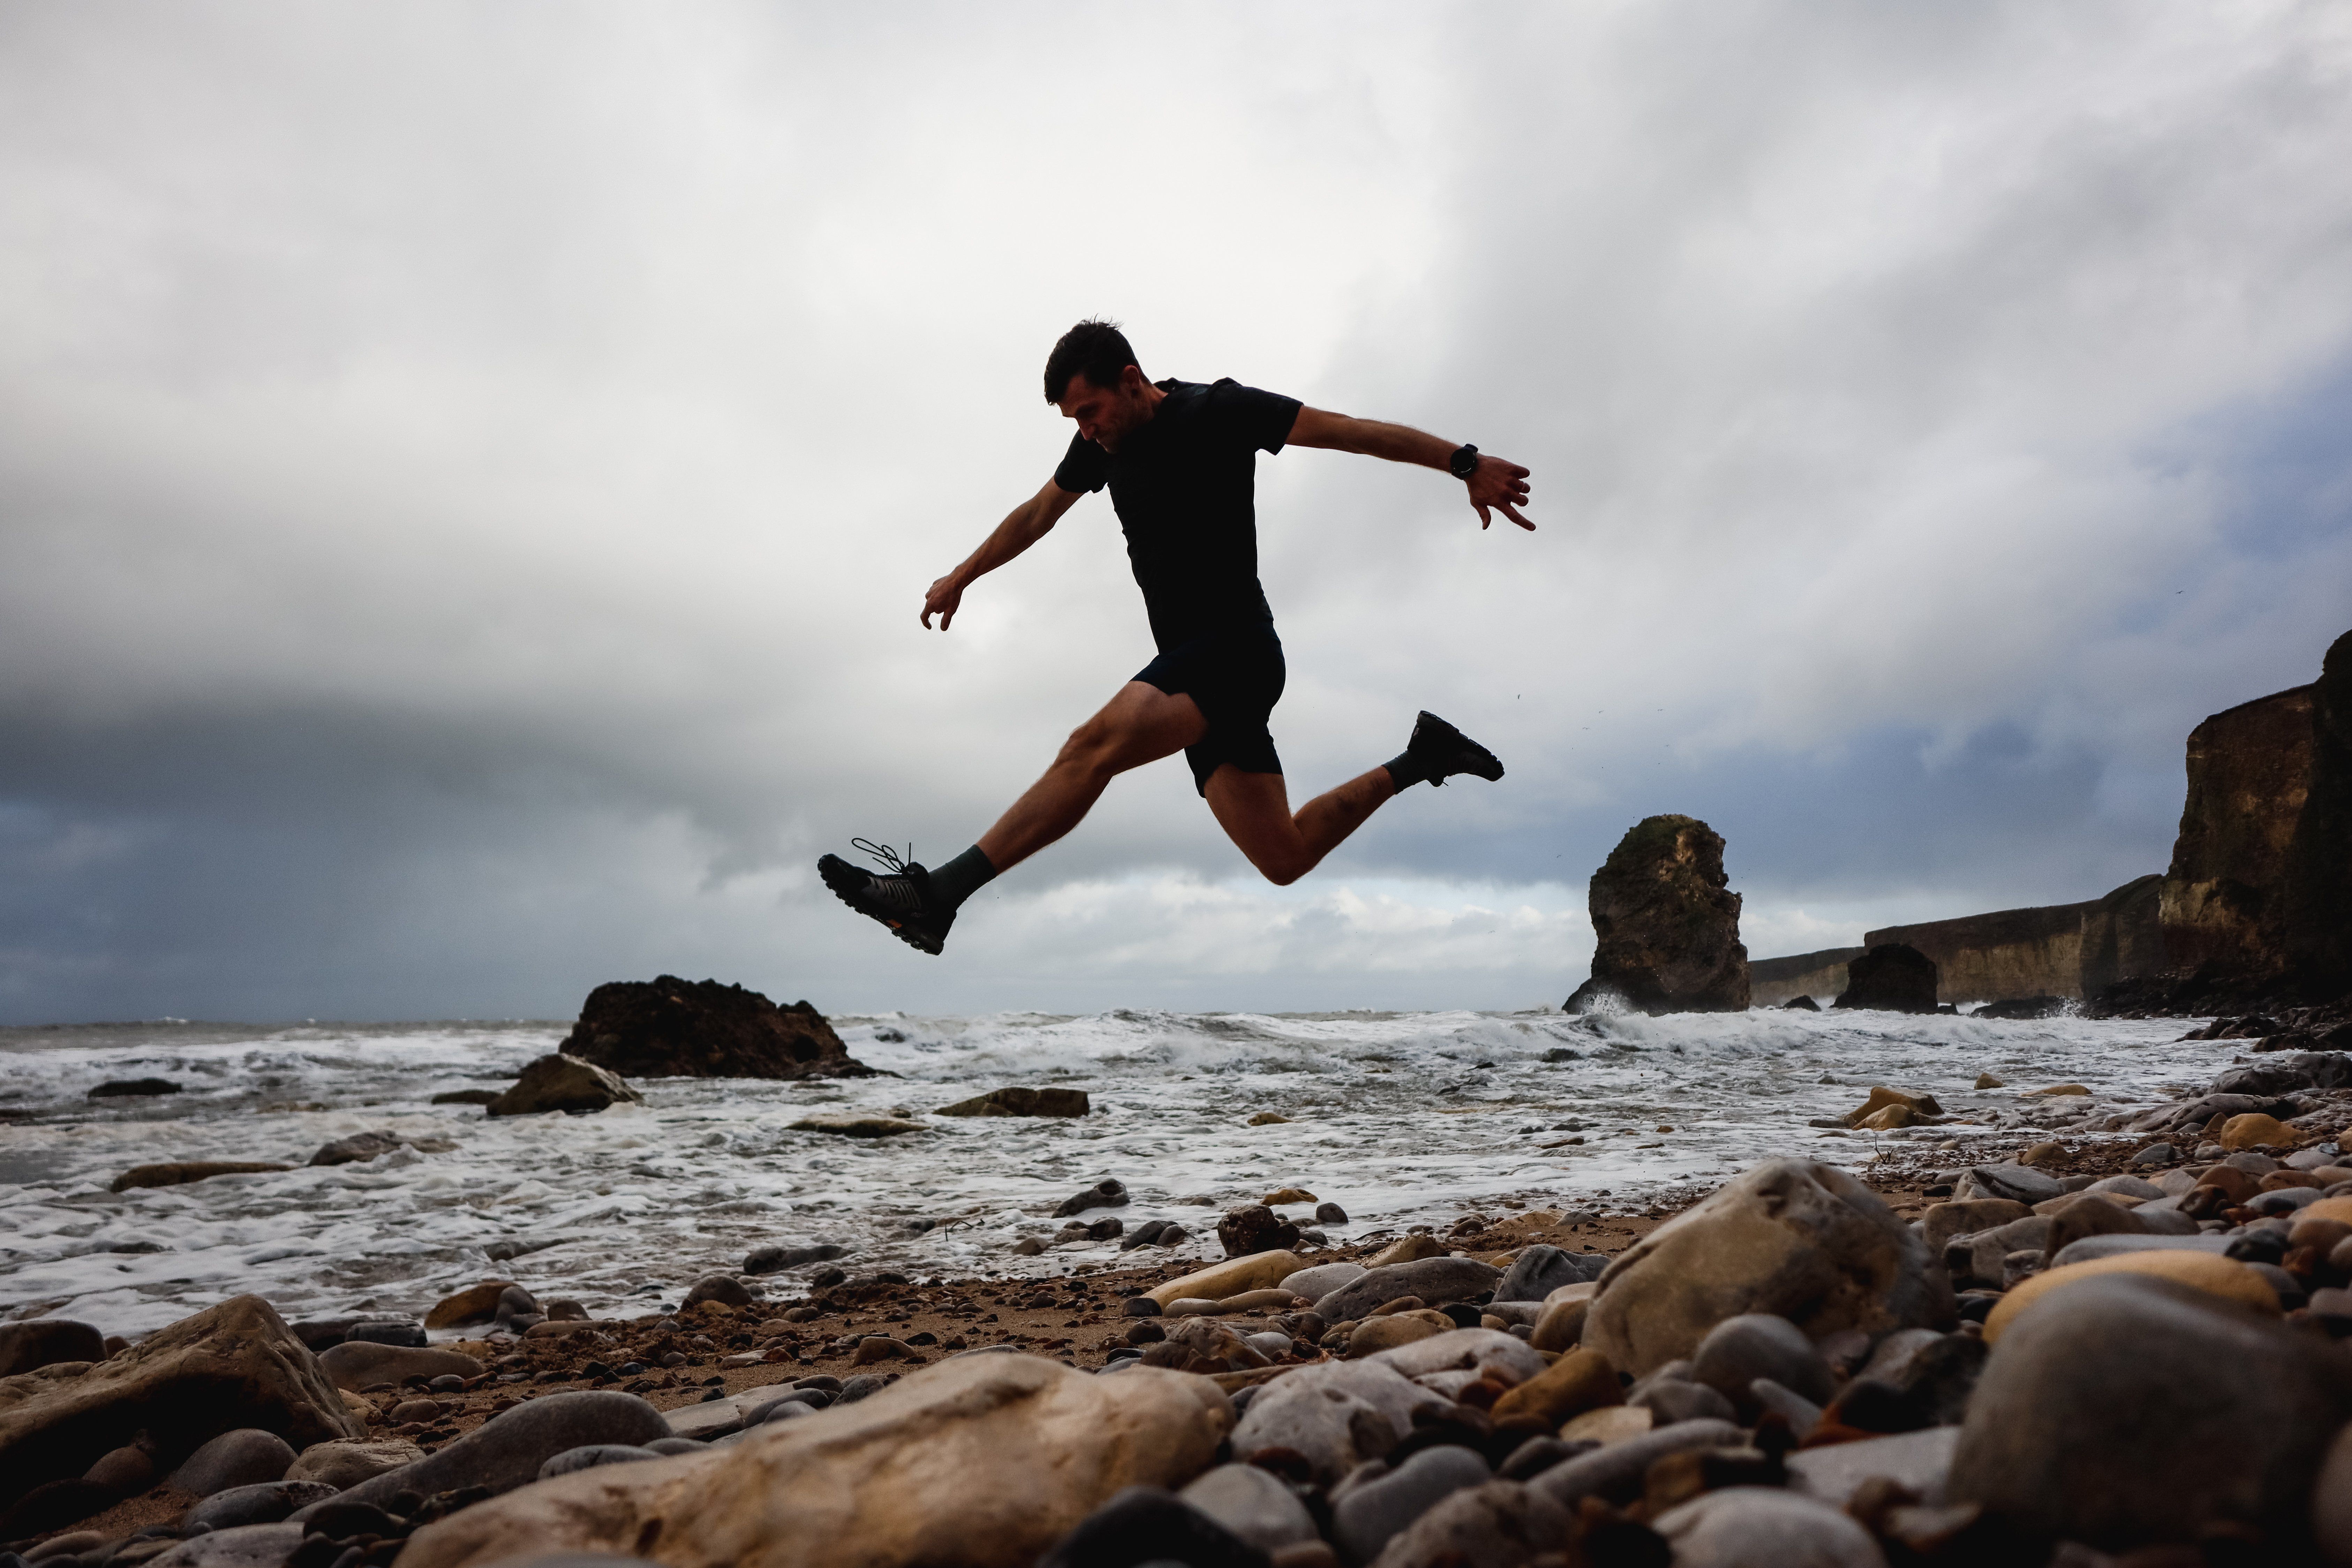 A trail runner captured jumping in the air on a rocky beach, creating a bold silhouette.